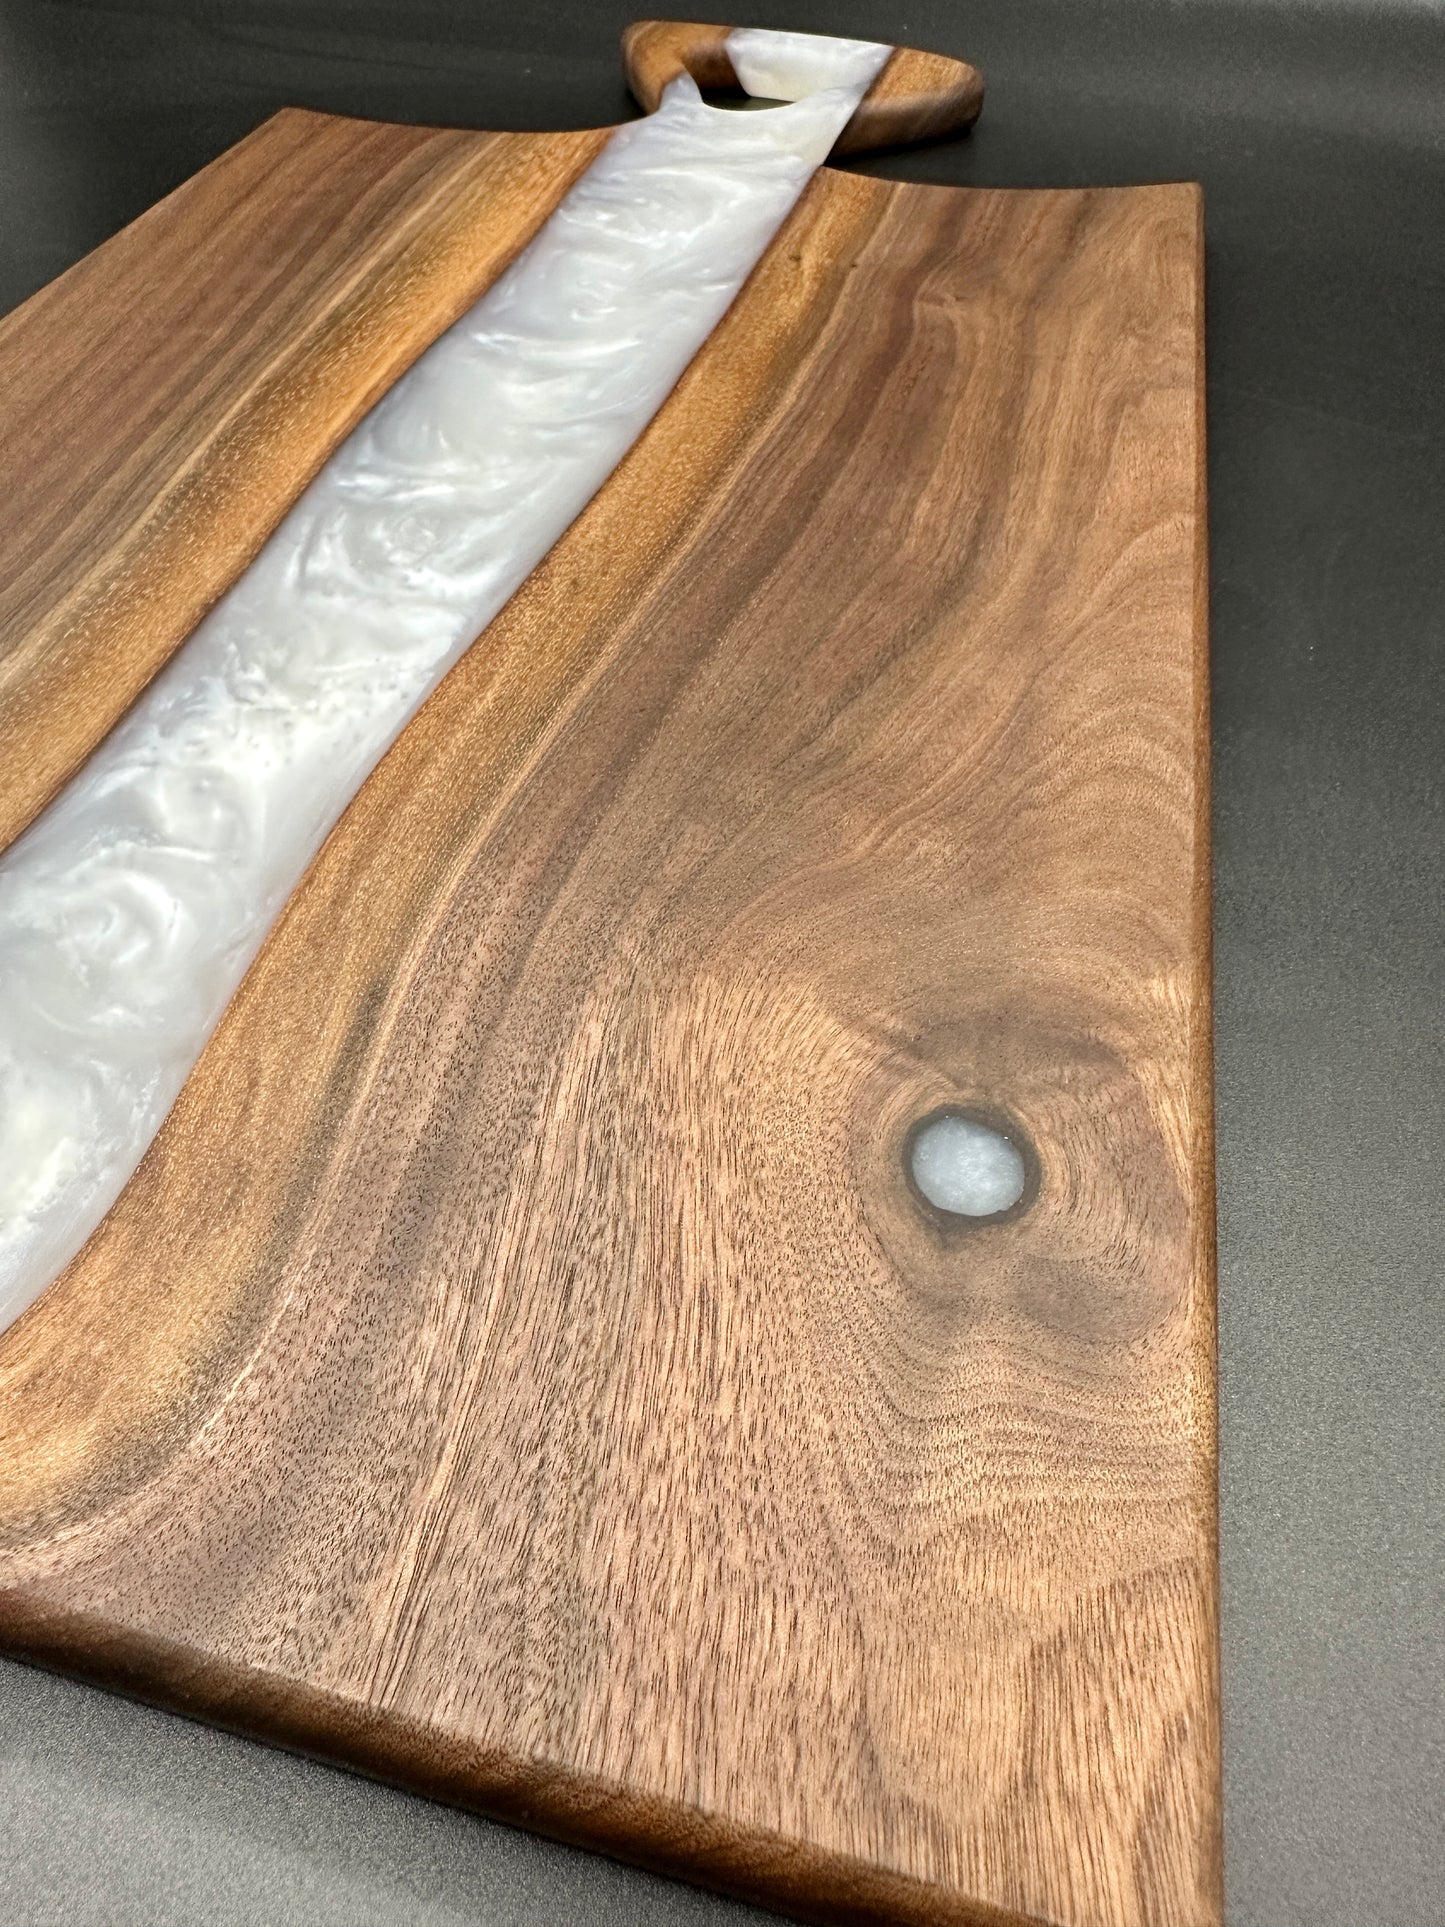 Walnut board with pearl white resin